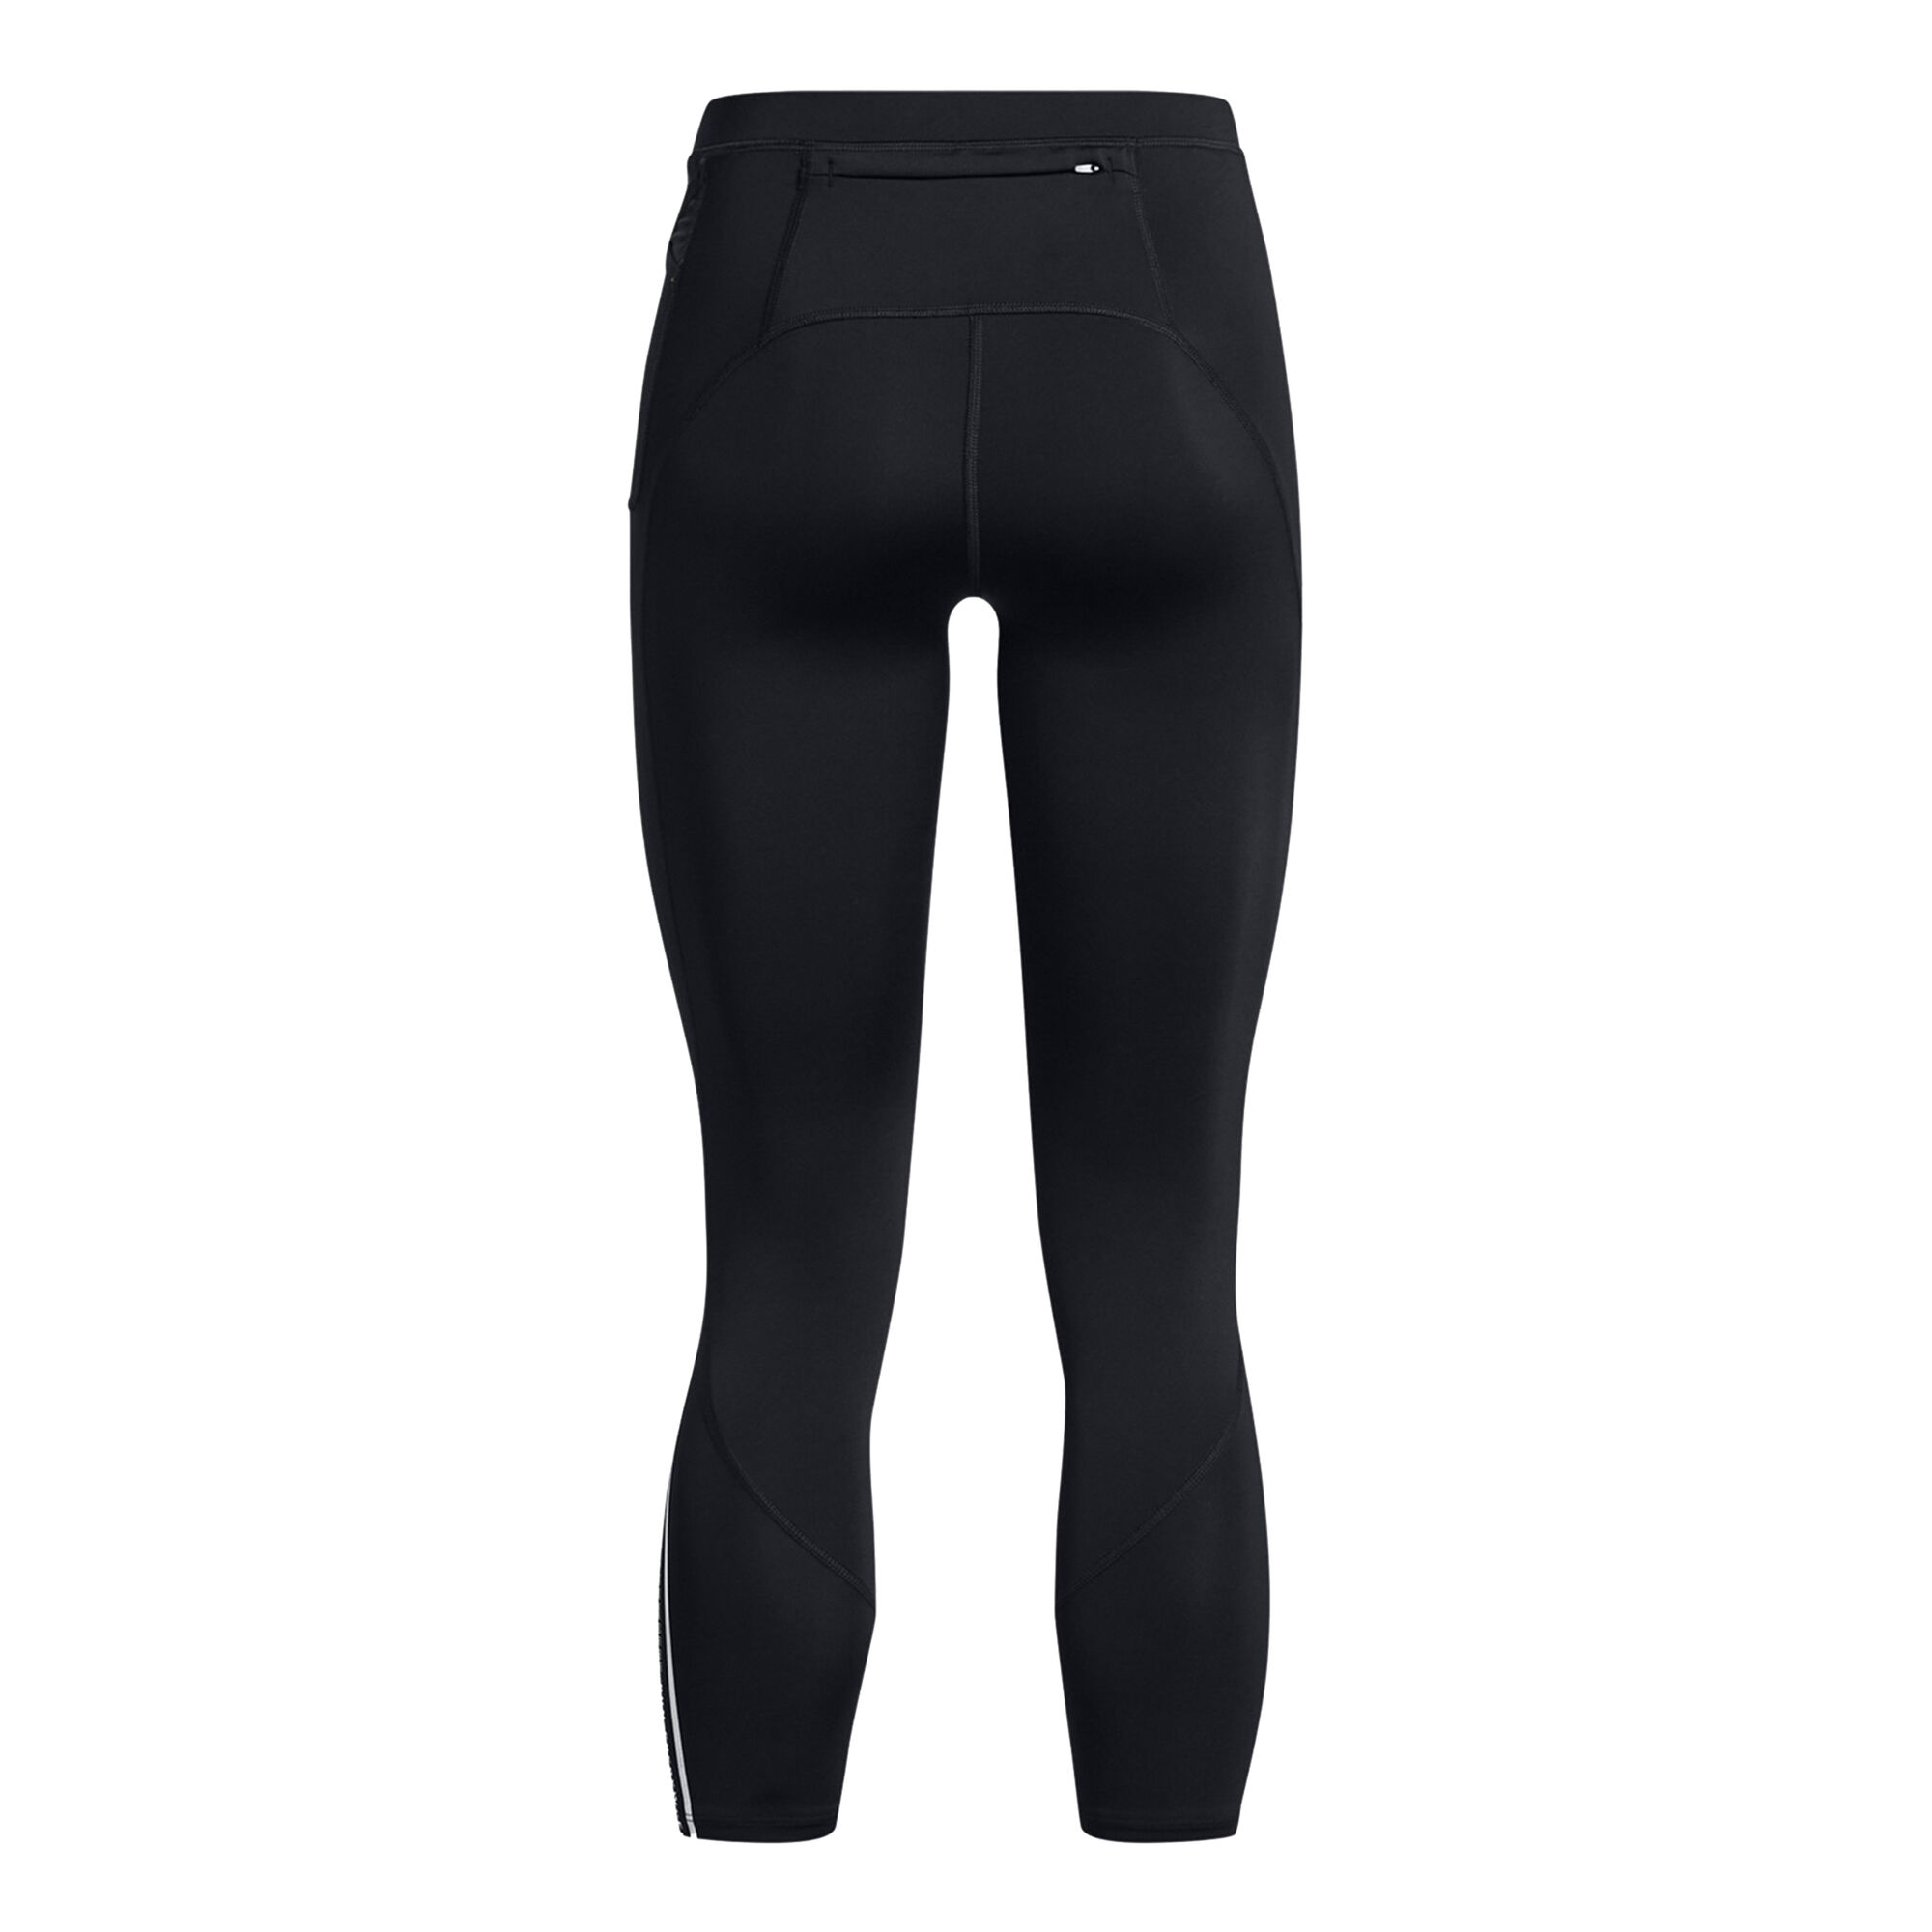 Women's tights Under Armour Run Anywhere